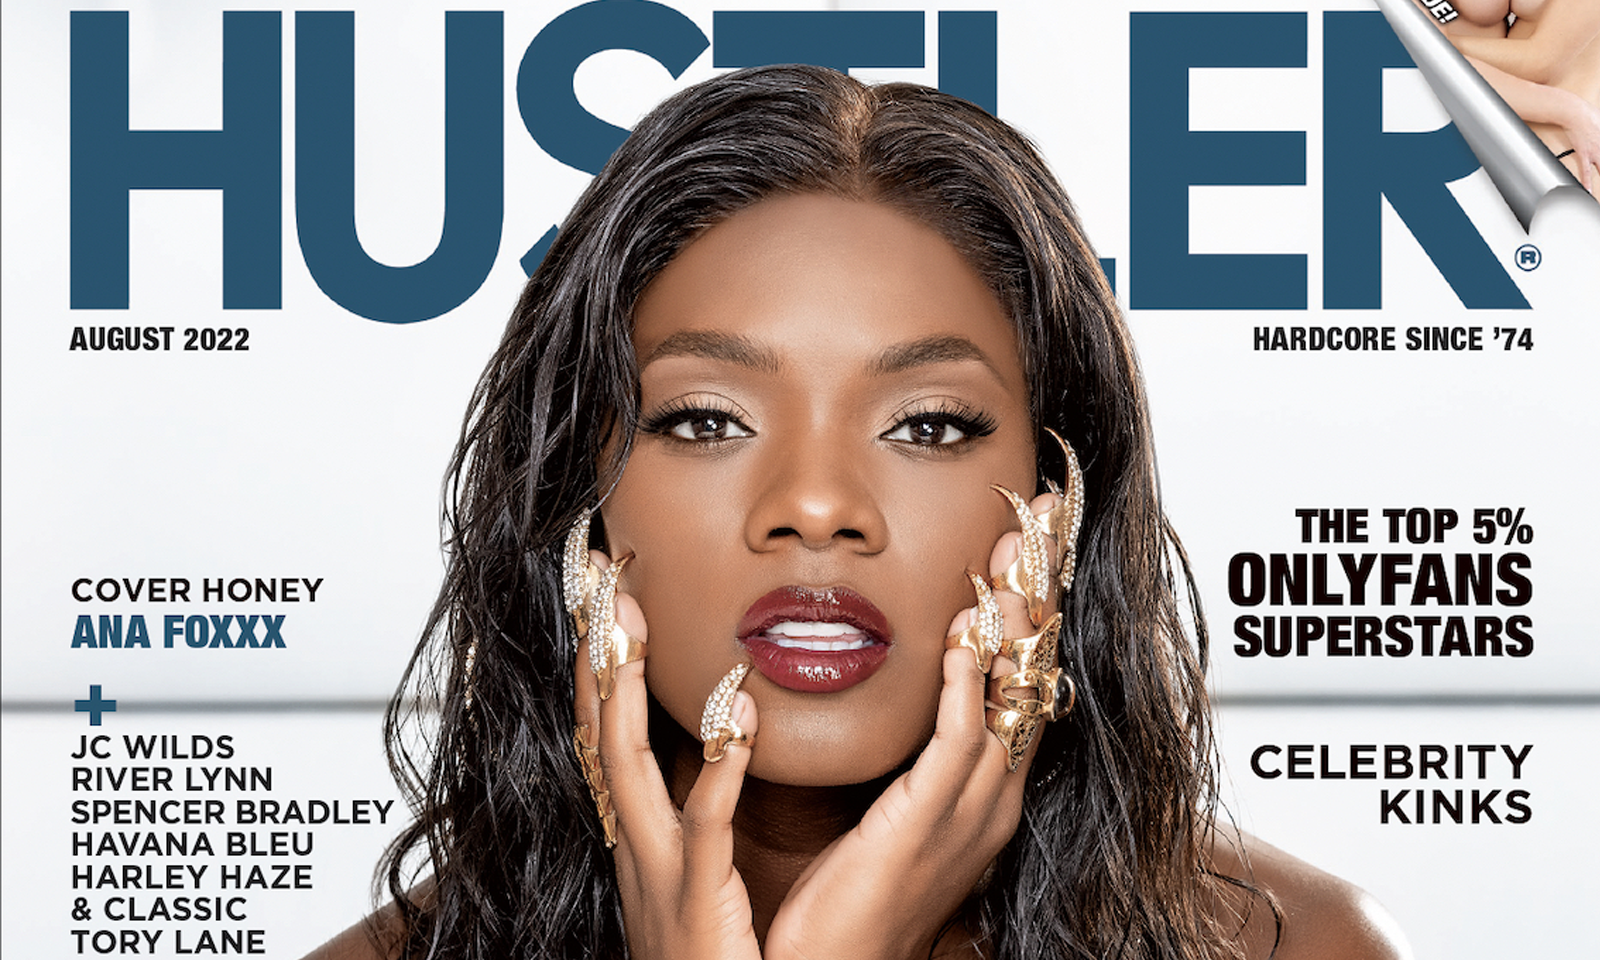 Ana Foxx Featured as Hustler's August Honey and Cover Model